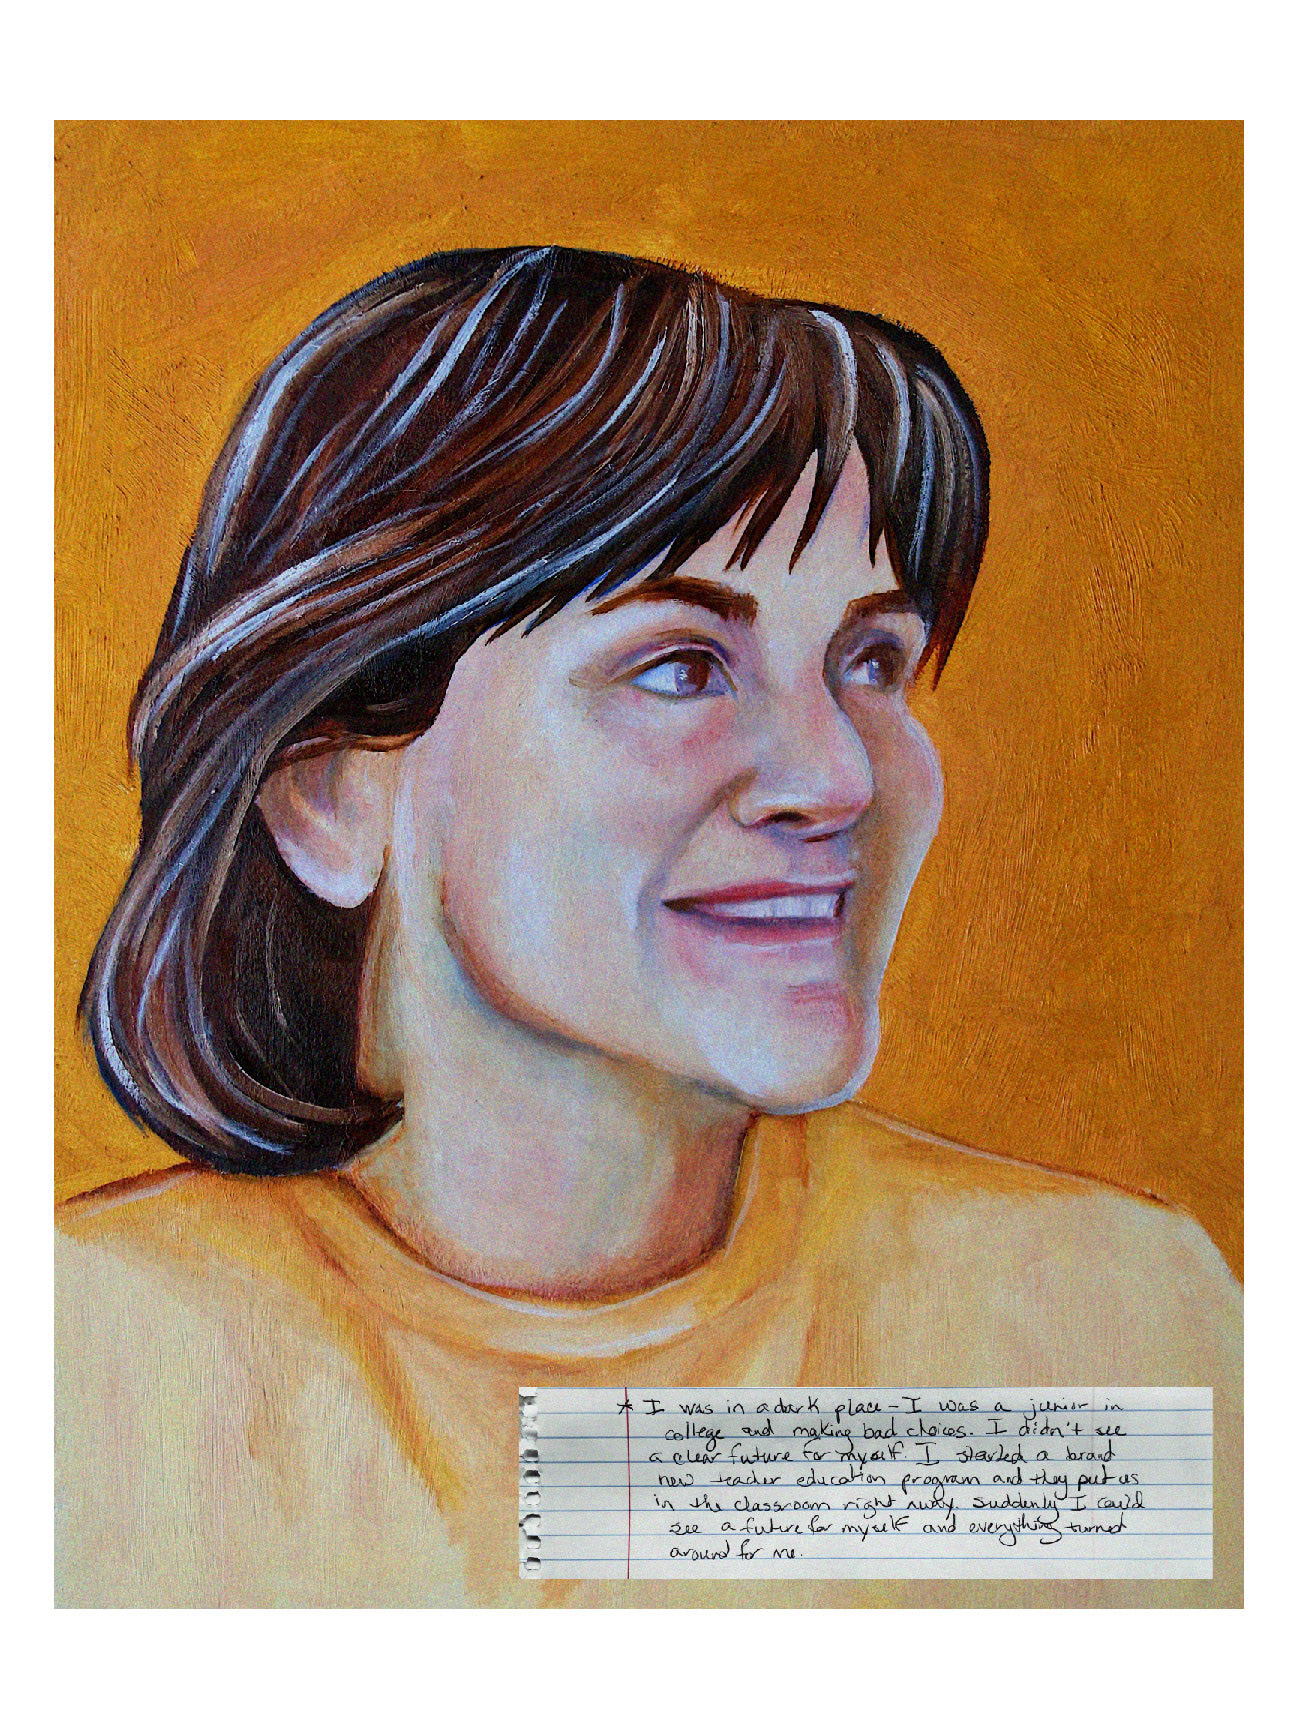 A painting of my mom, a brunette with bangs, looking to the right with a grateful smile.